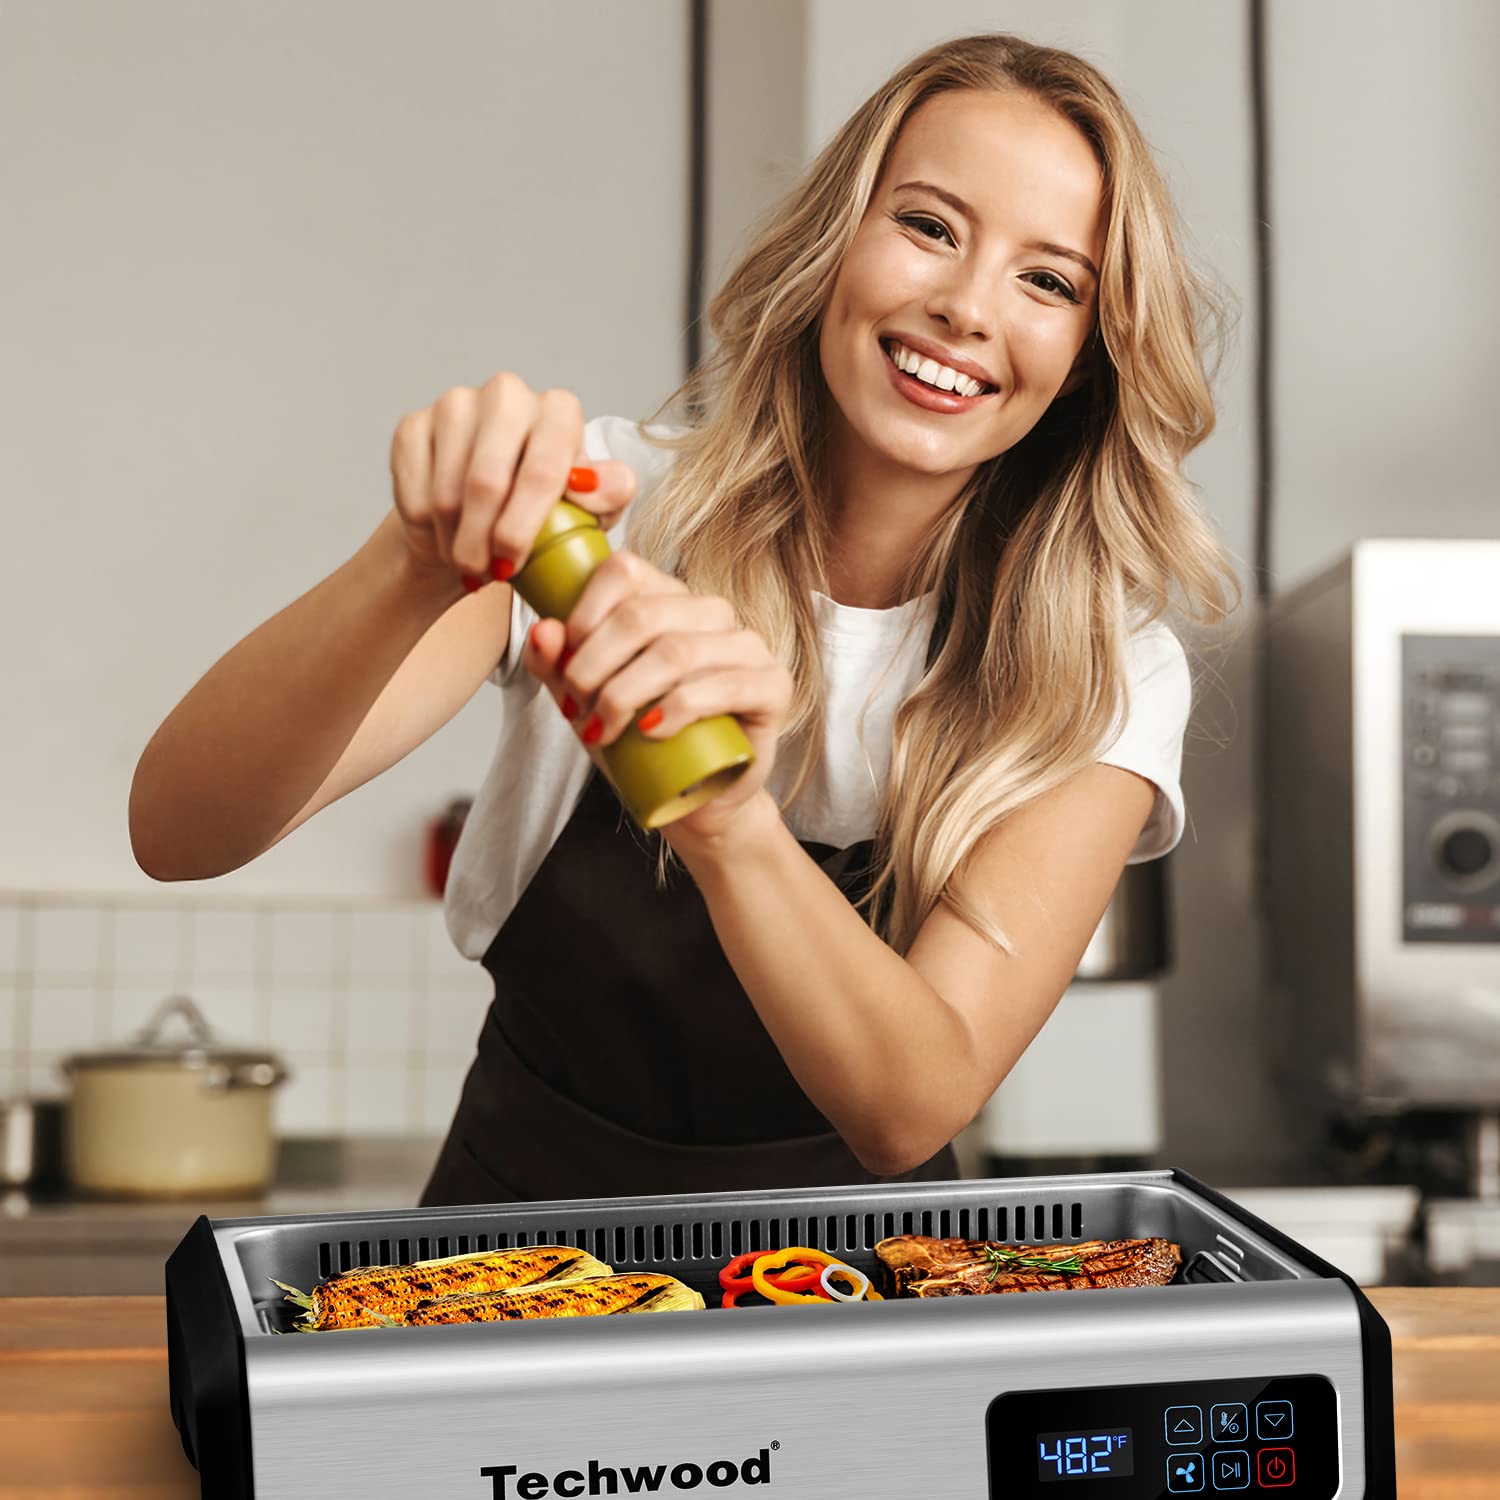 Beat the heat and BBQ indoors with this smokeless grill